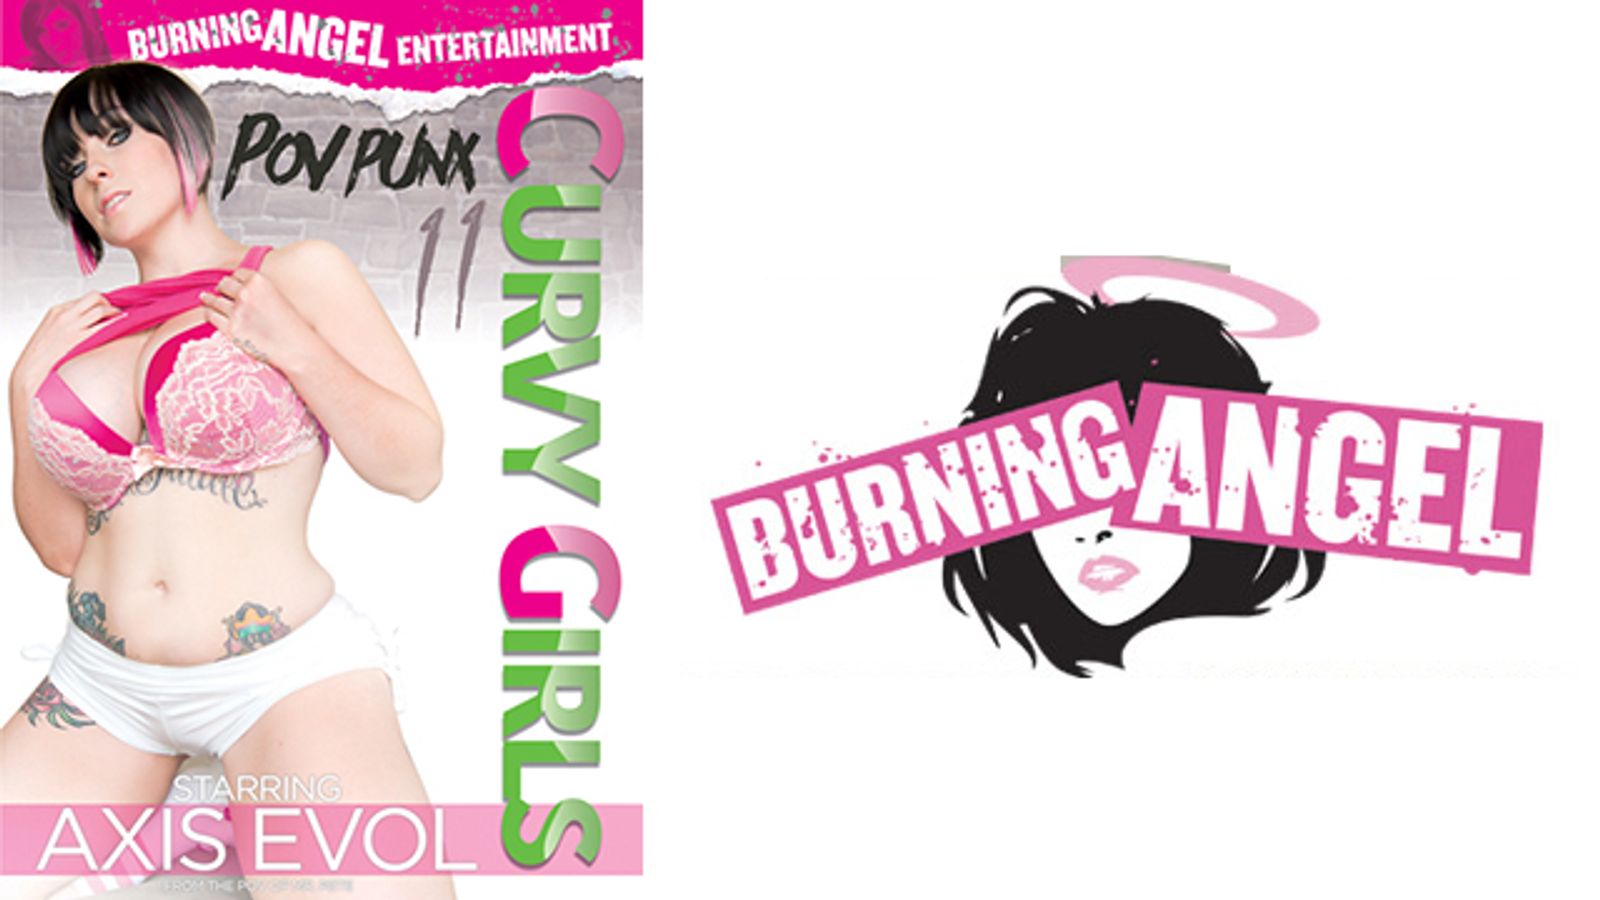 ‘POV Punx 11—Curvy Girls’ Now Available From Burning Angel